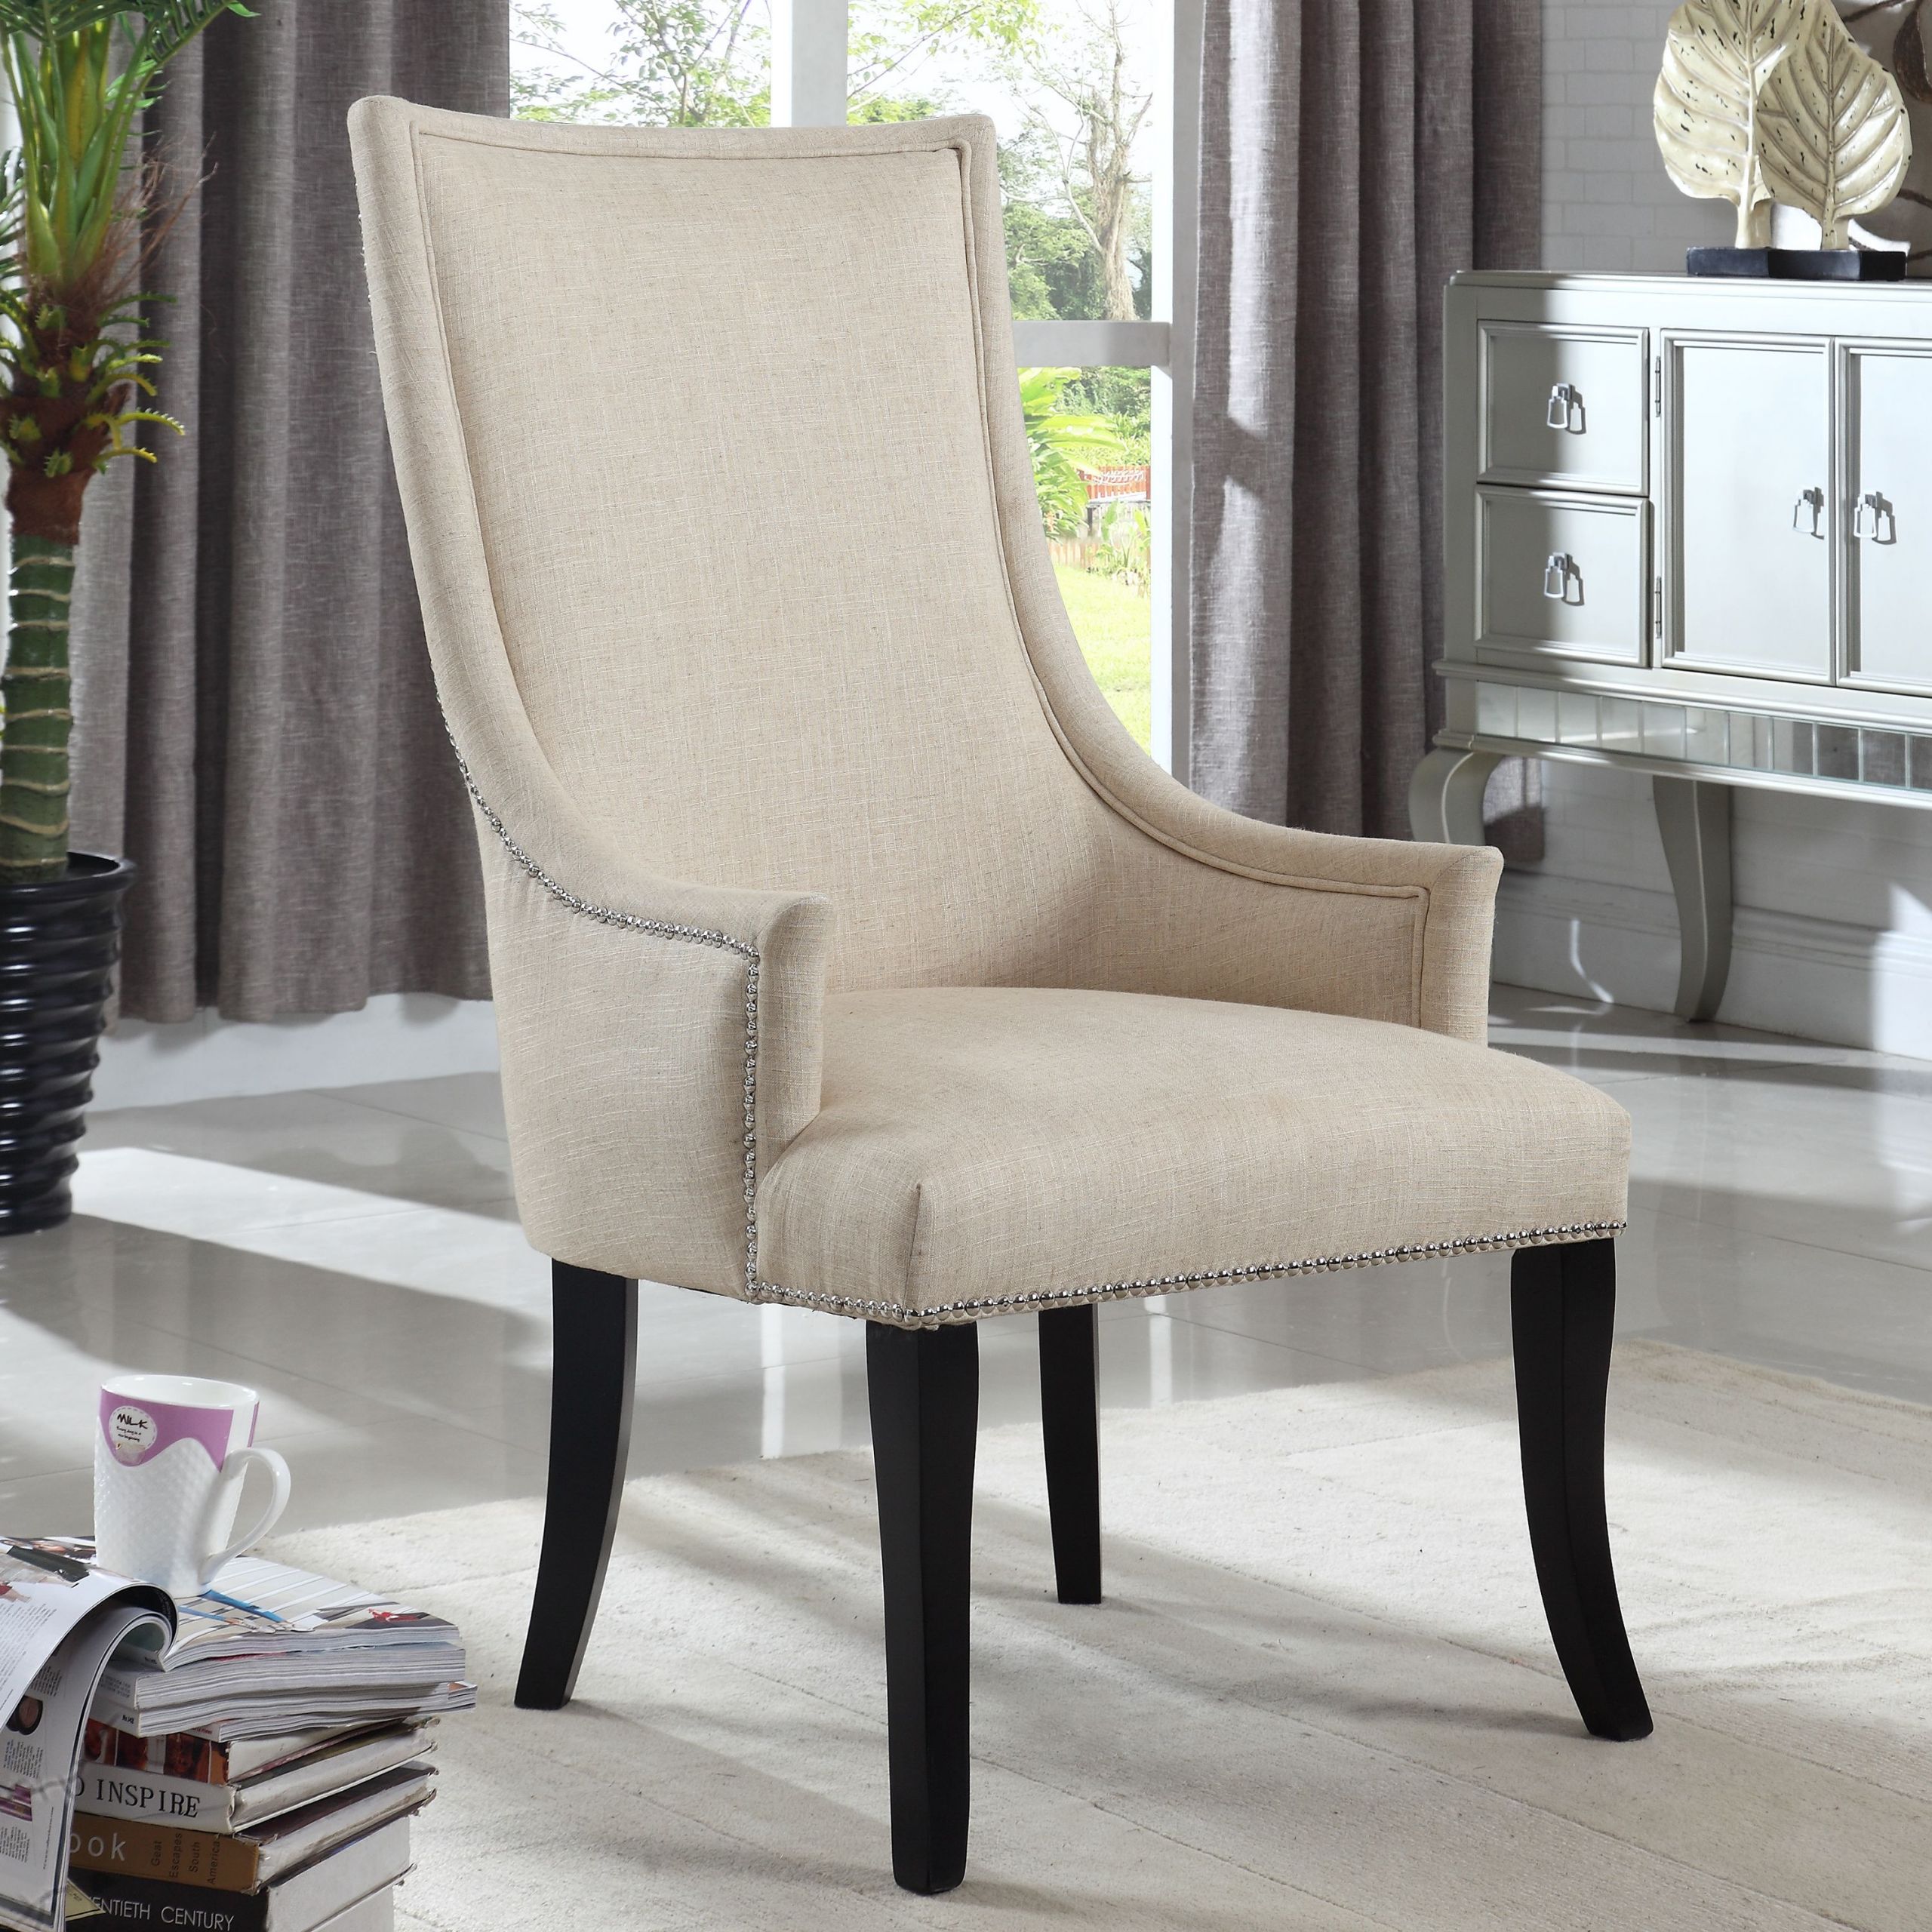 Living Room Chairs Walmart
 Best Master Furniture s Audrey Fabric Living Room Accent